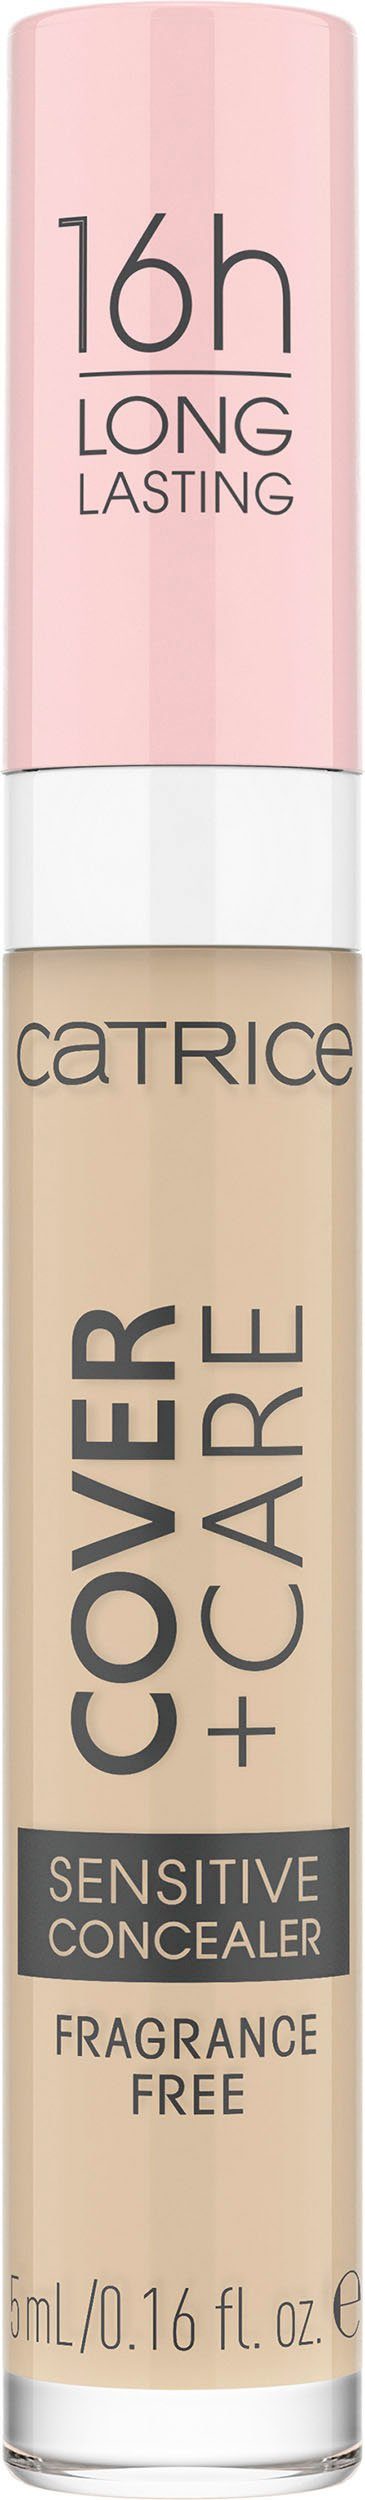 Catrice Concealer 010C + Care Concealer, Cover Sensitive nude 3-tlg. Catrice